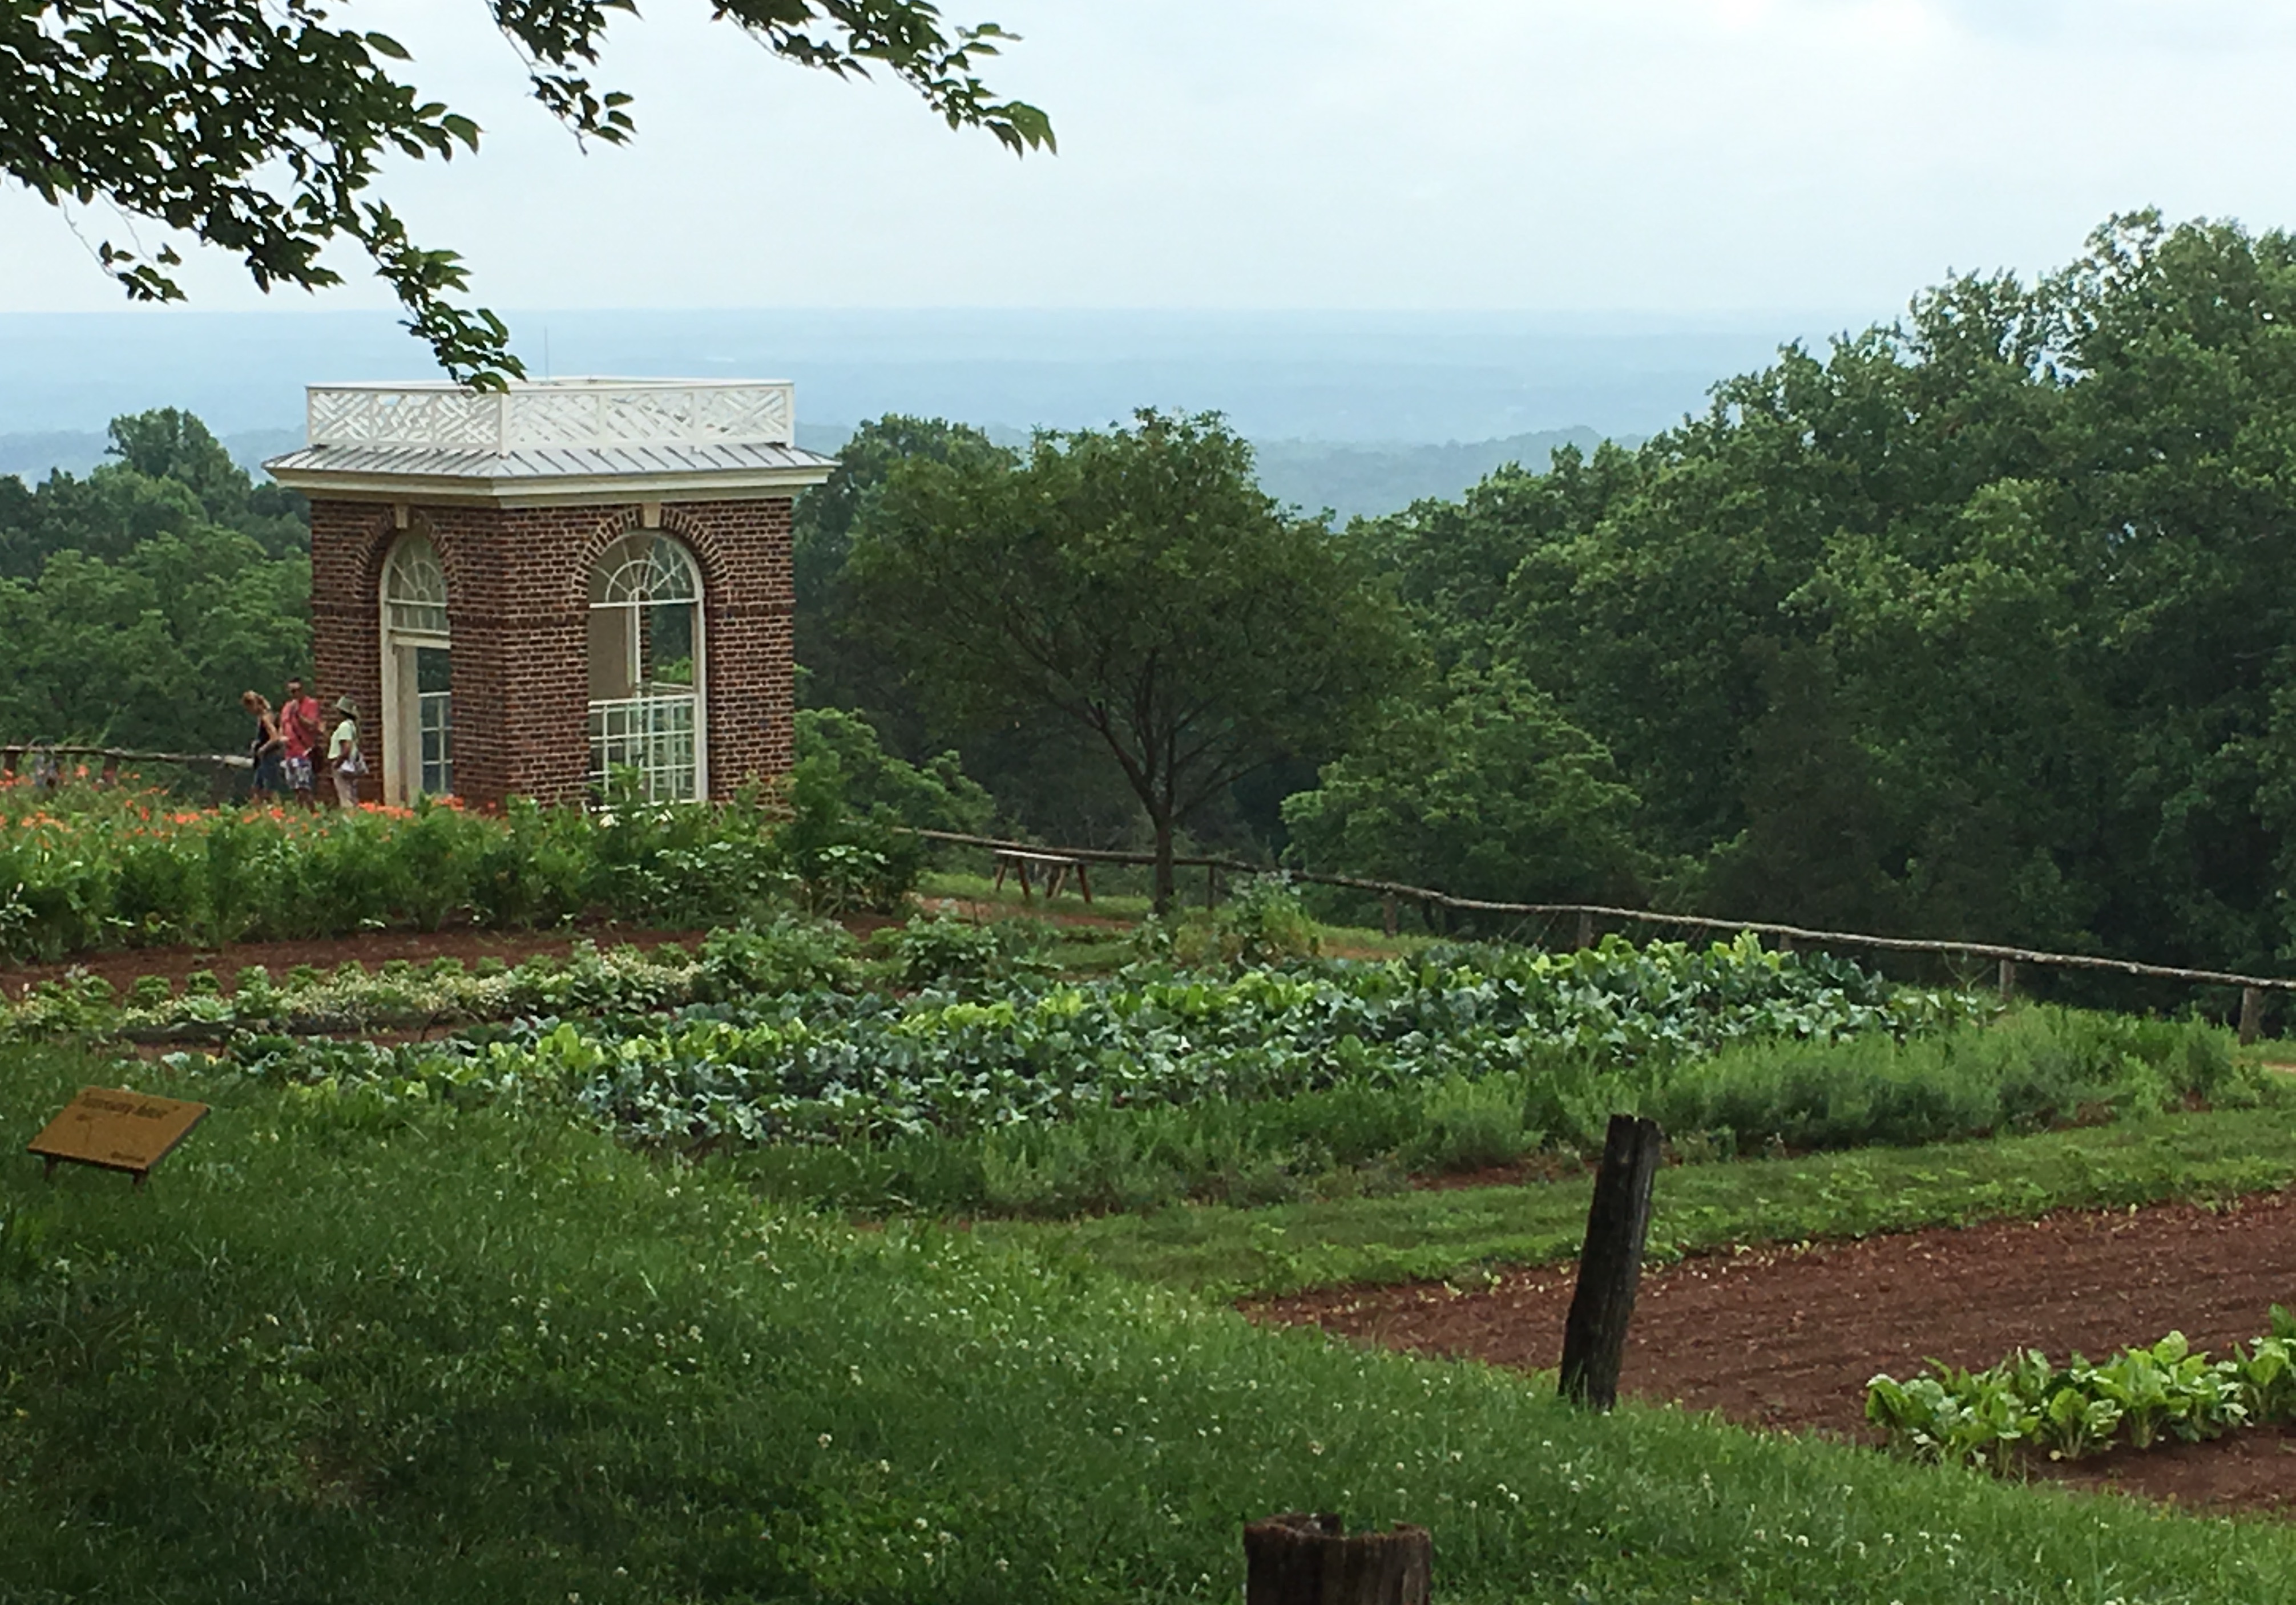 The beautiful gardens at Monticello - Thomas Jeffersons home, just a short drive from RBS.